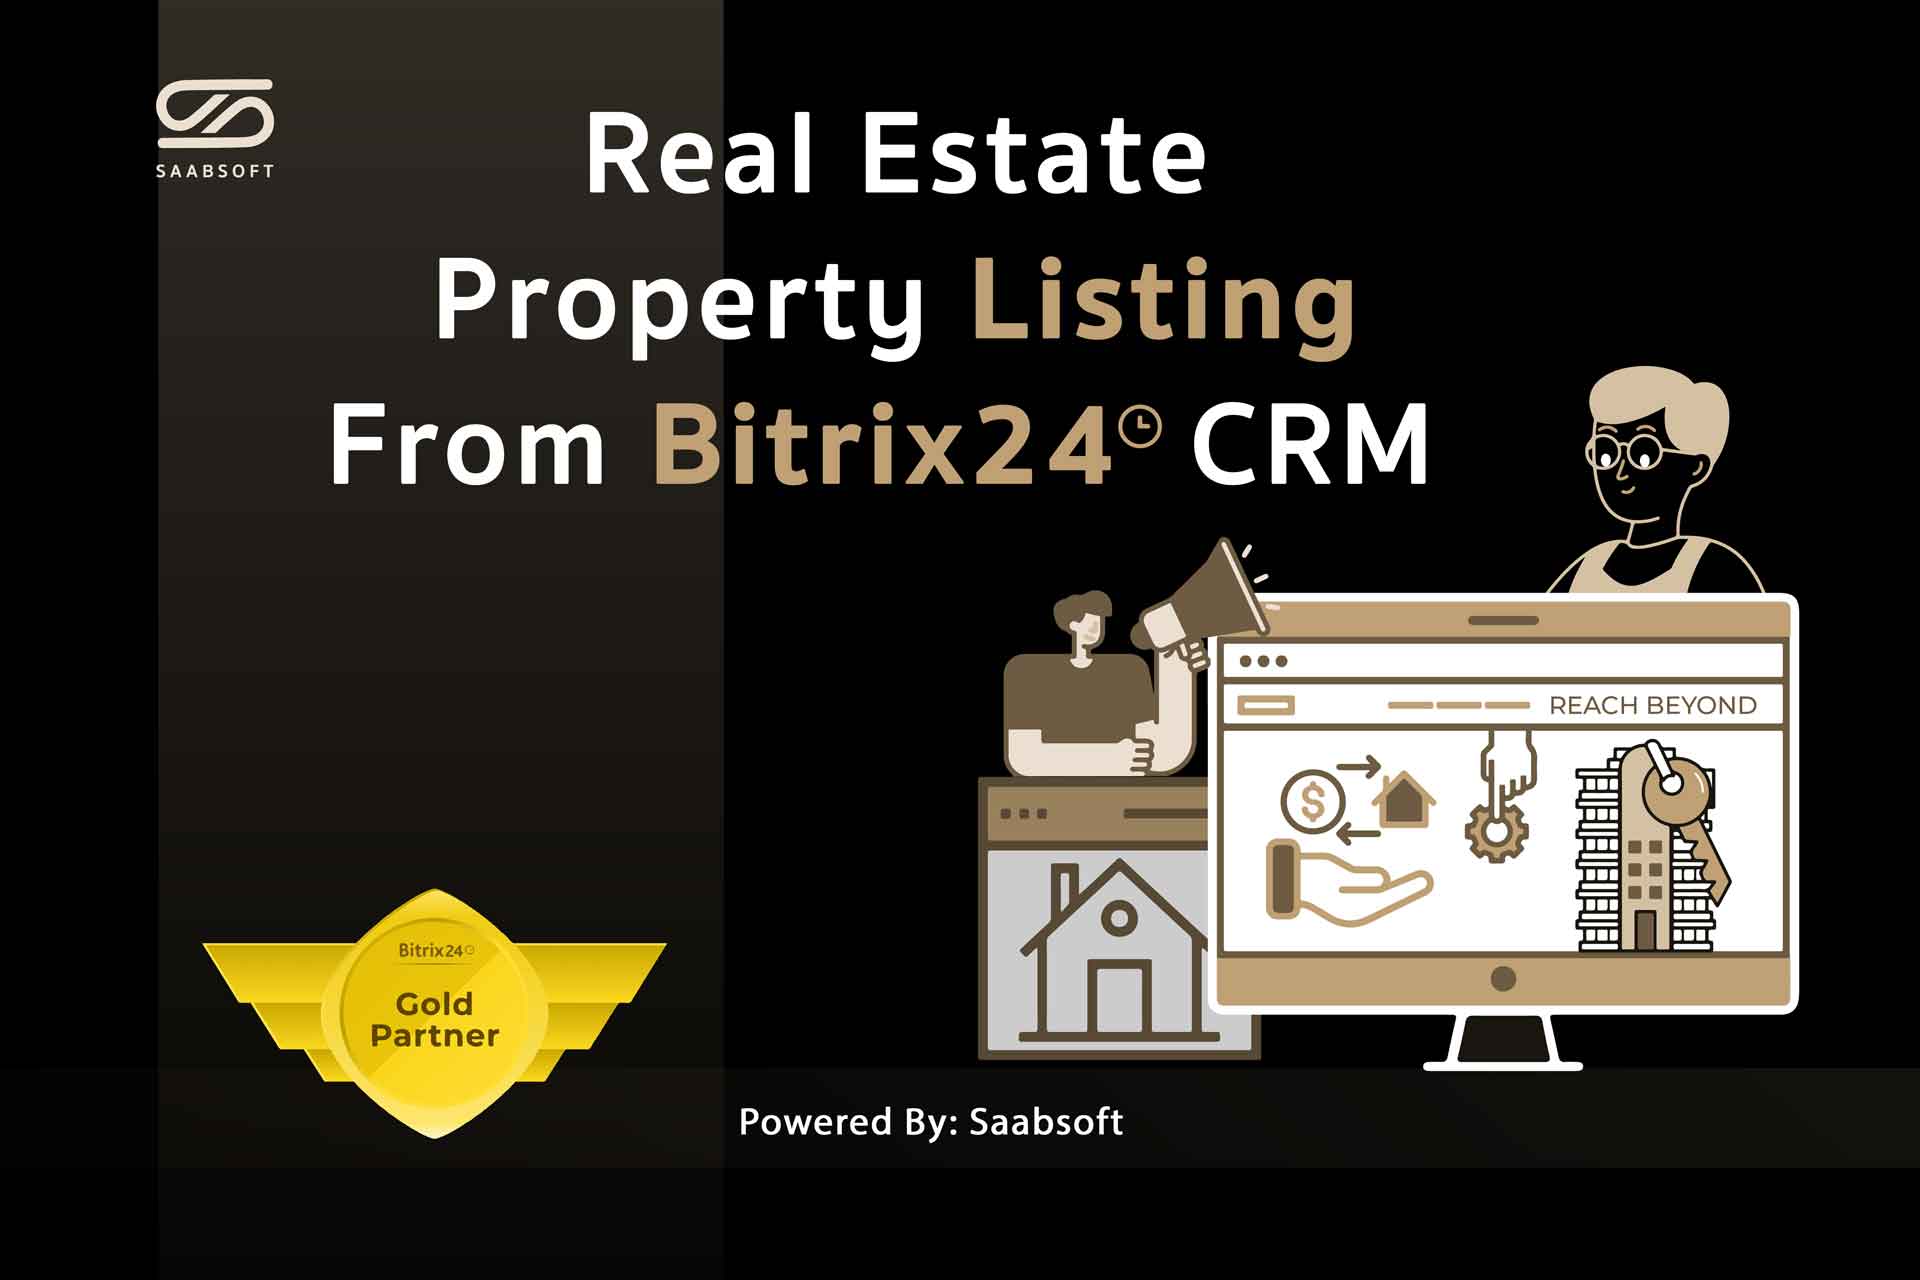 Bitrix24 Dubai property listing and management by Saabsoft